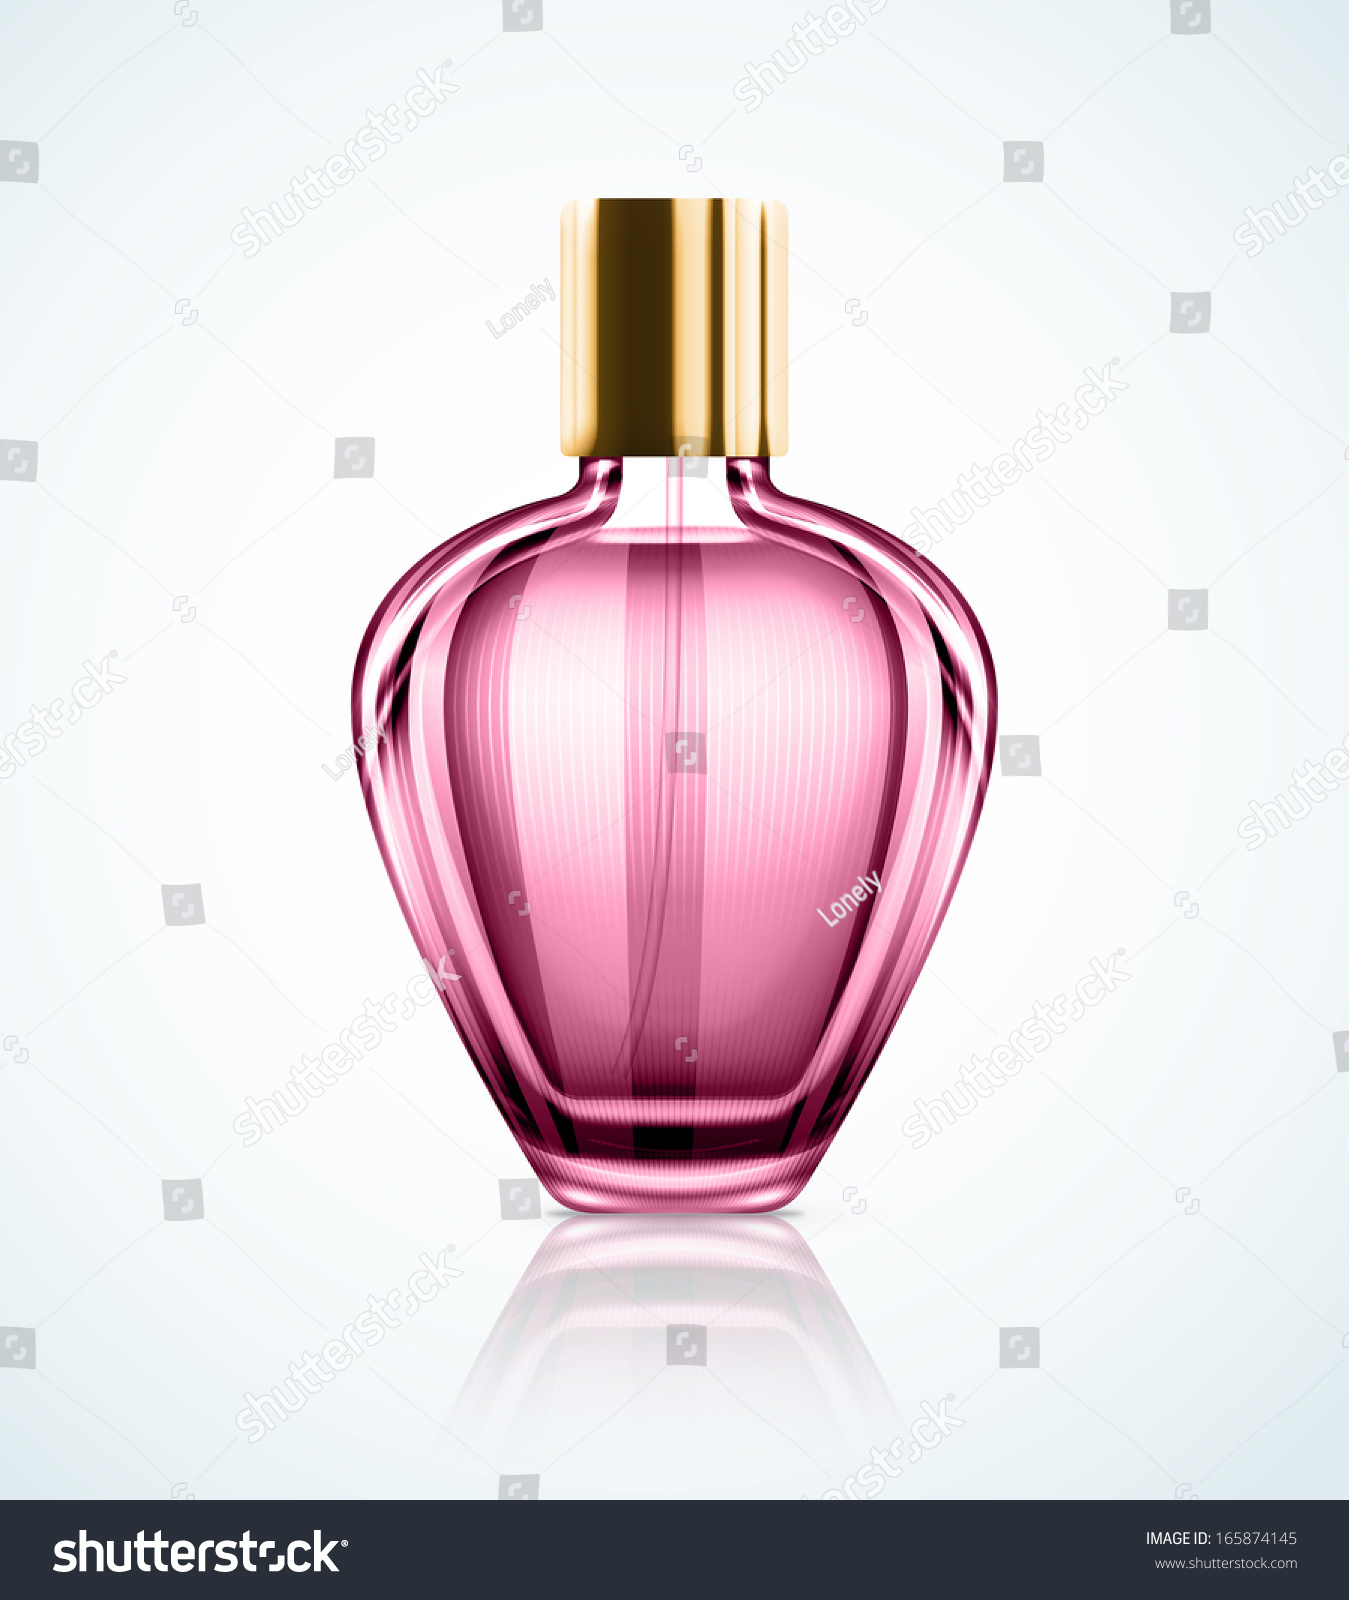 SVG of Isolated perfume bottle. Illustration contains transparency and blending effects, eps 10 svg